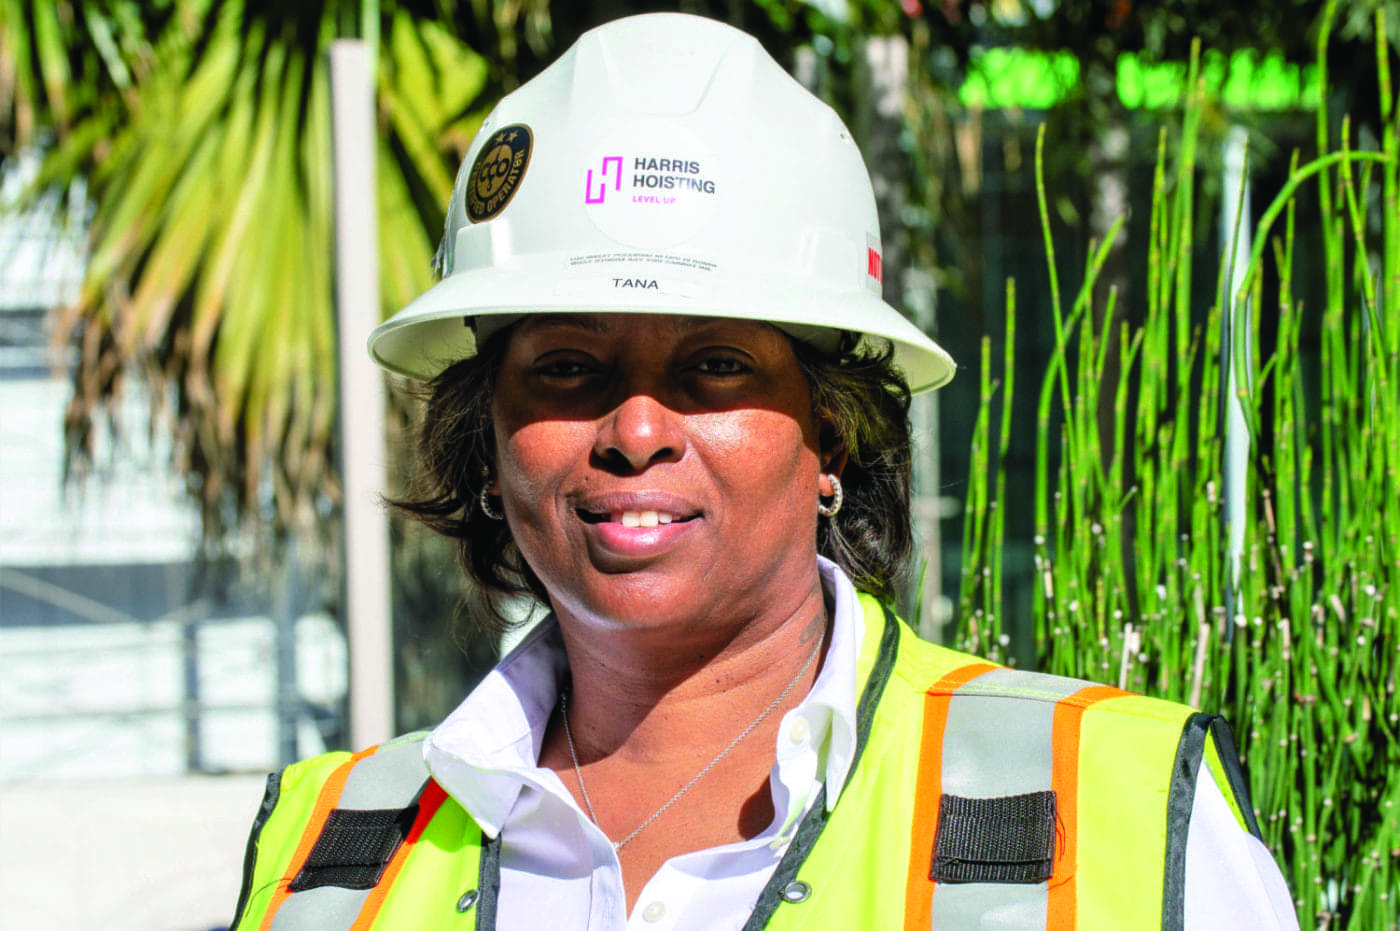 Tana-HarrisHarris-Hoisting-in-hard-hat-1400x931, Building up women for careers in construction, Local News & Views 